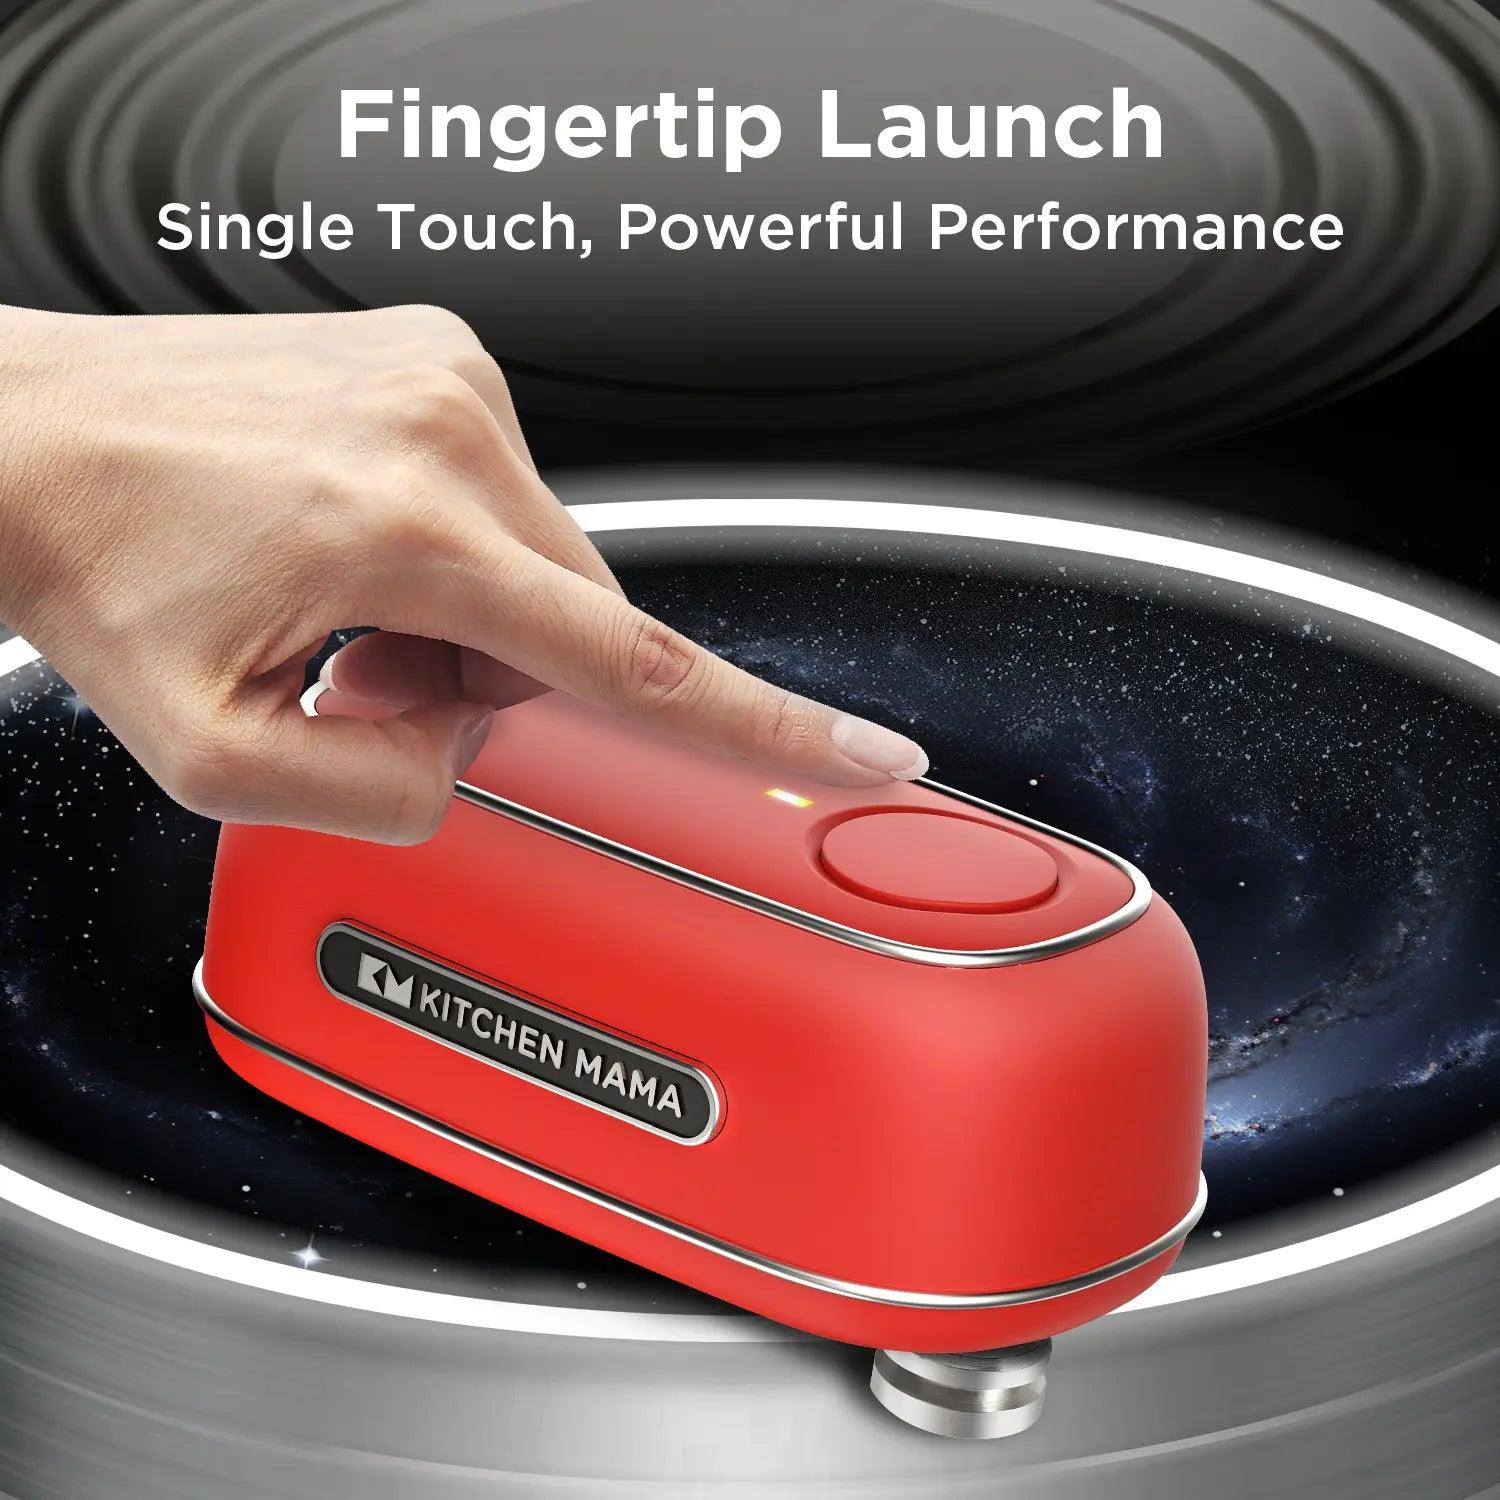 Kitchen Mama Orbit One Rechargeable Can Opener, CO5600-R, Fingertip launch, single touch, powerful performance